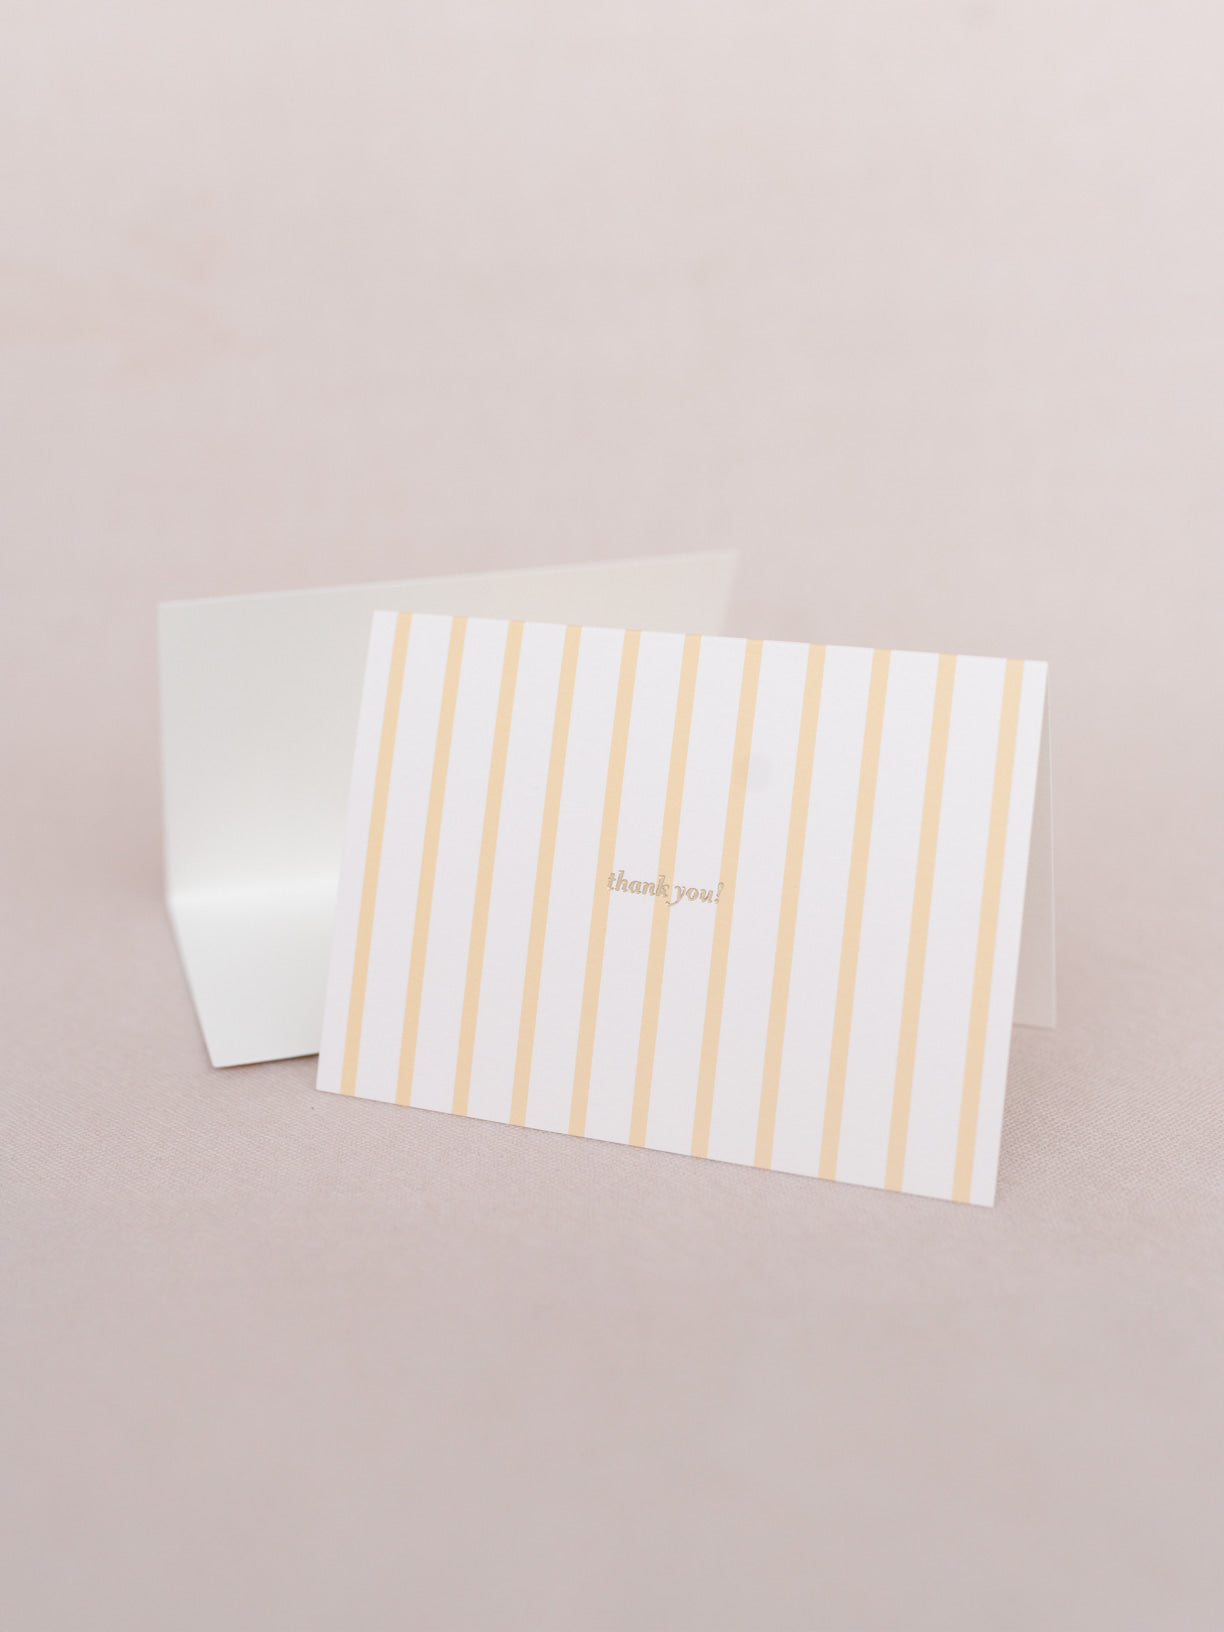 French Stripe Yellow and Blush Foil Pressed 4 Bar Folded Thank You Note - Set of 8